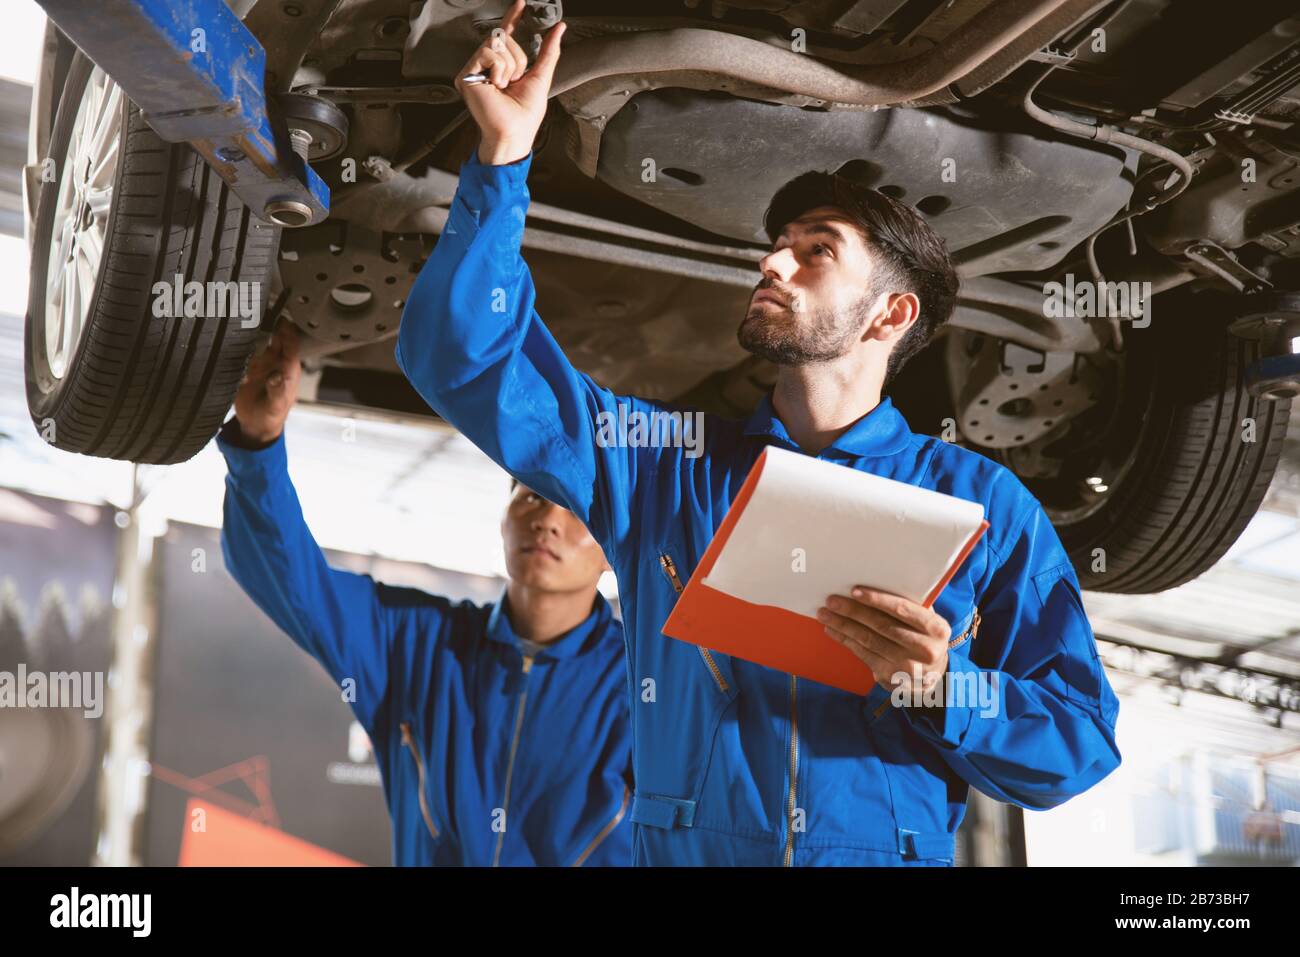 Mechanic in blue work wear uniform inspects the car bottom with his assistant. Automobile repairing service, Professional occupation teamwork. Stock Photo